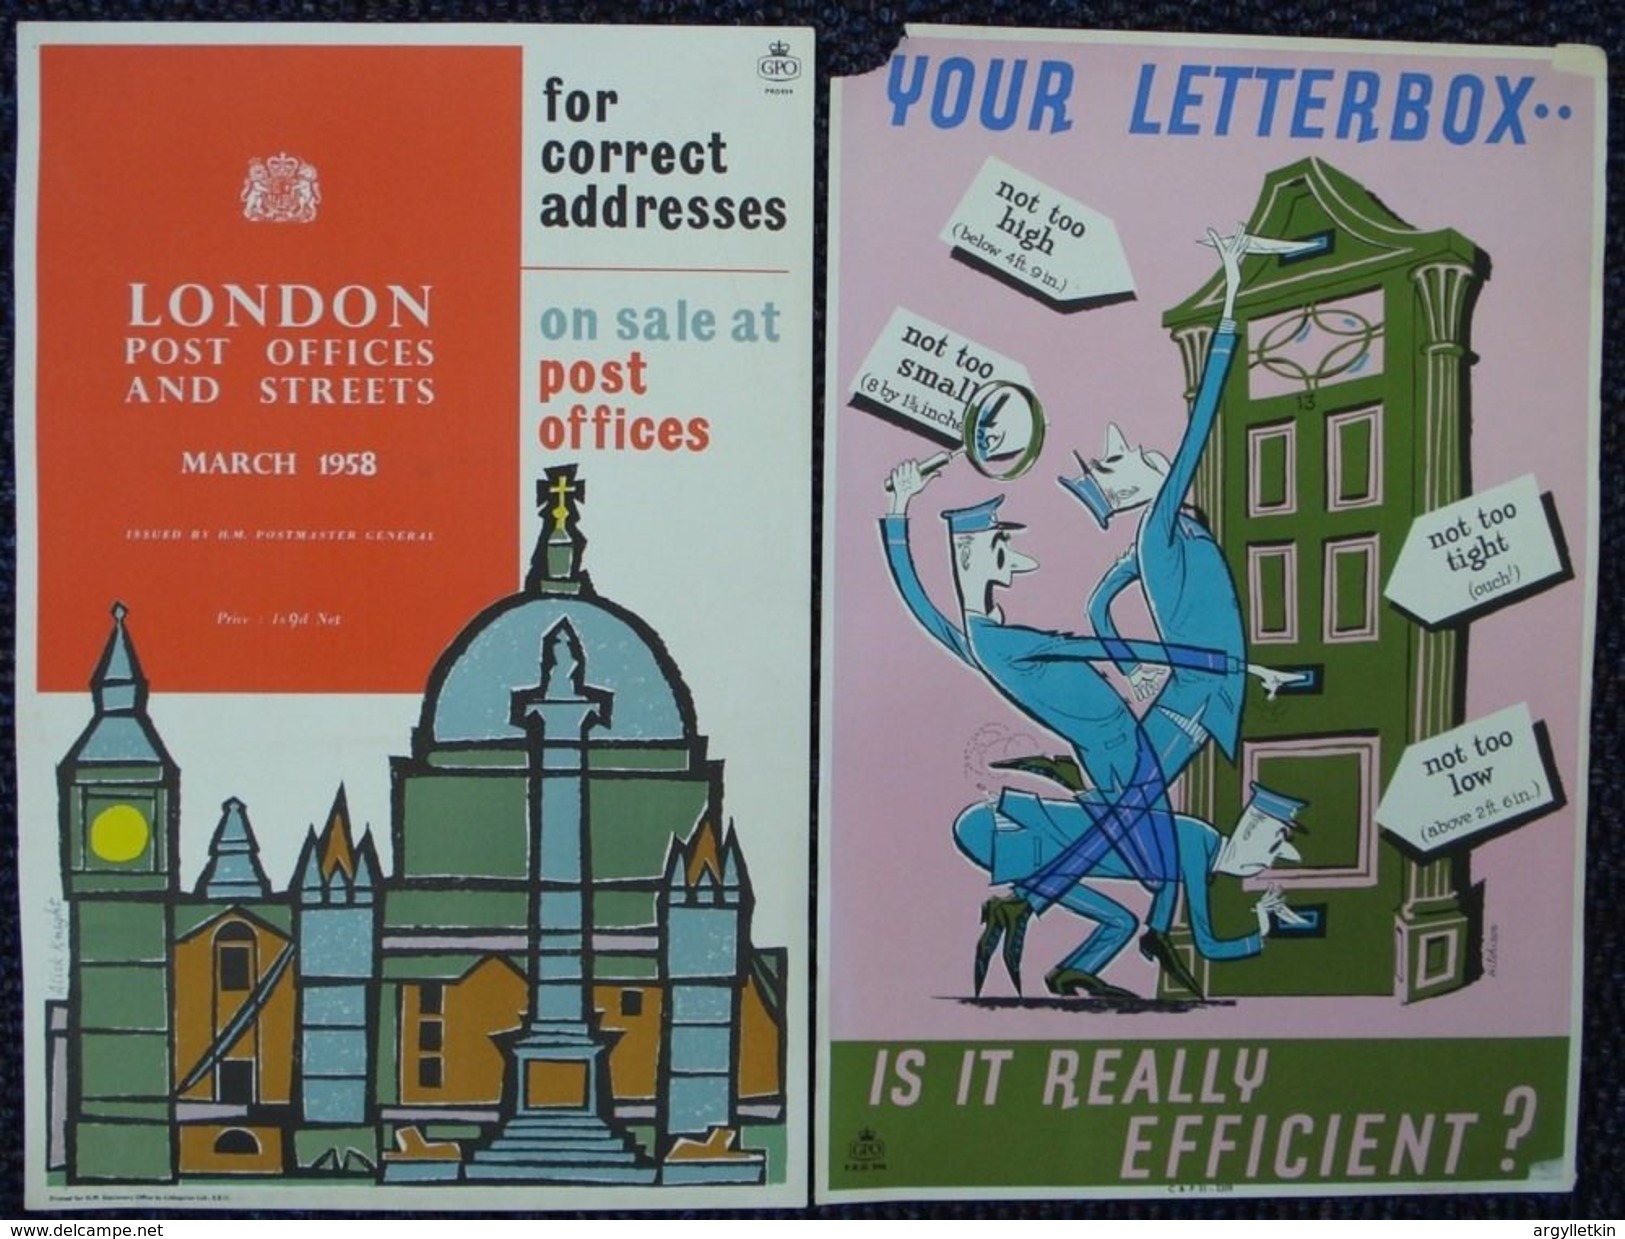 GREAT BRITAIN POST OFFICE POSTAL HISTORY LONDON LETTERBOX CABLE 1958 - Advertising